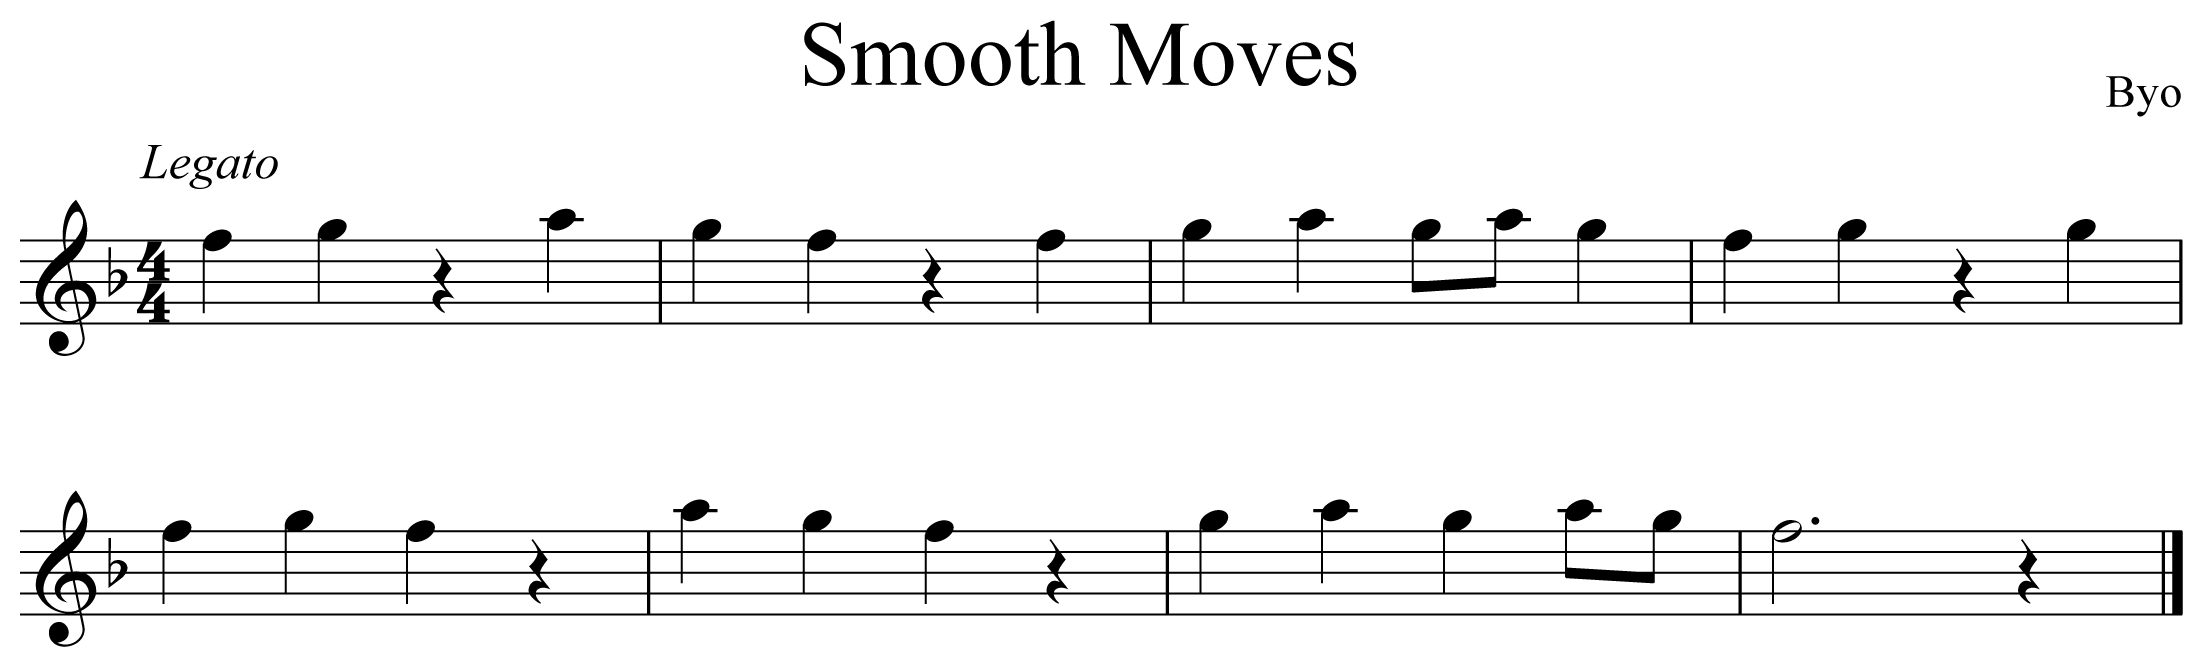 Smooth Moves Music Notation Flute